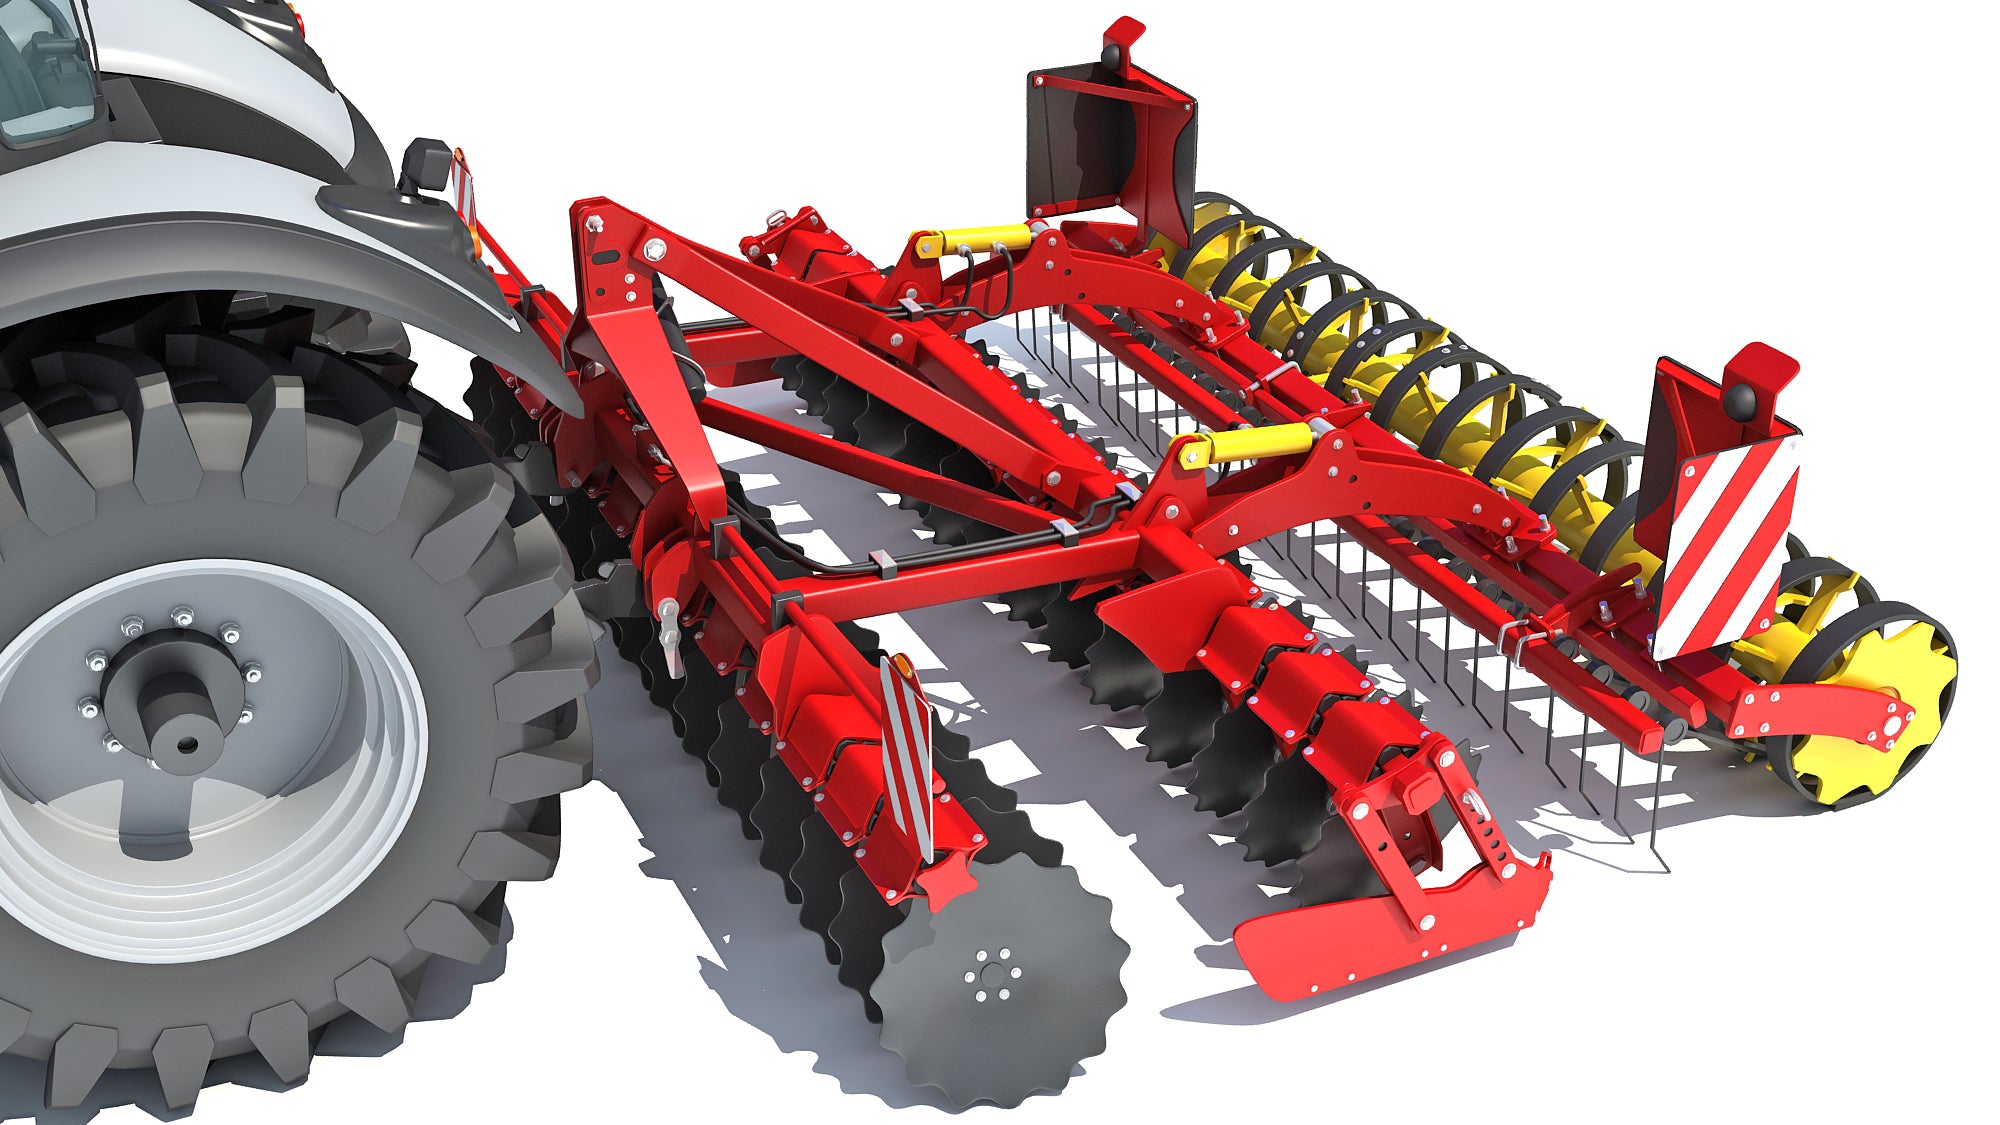 Tractor with Compact Disc Harrow